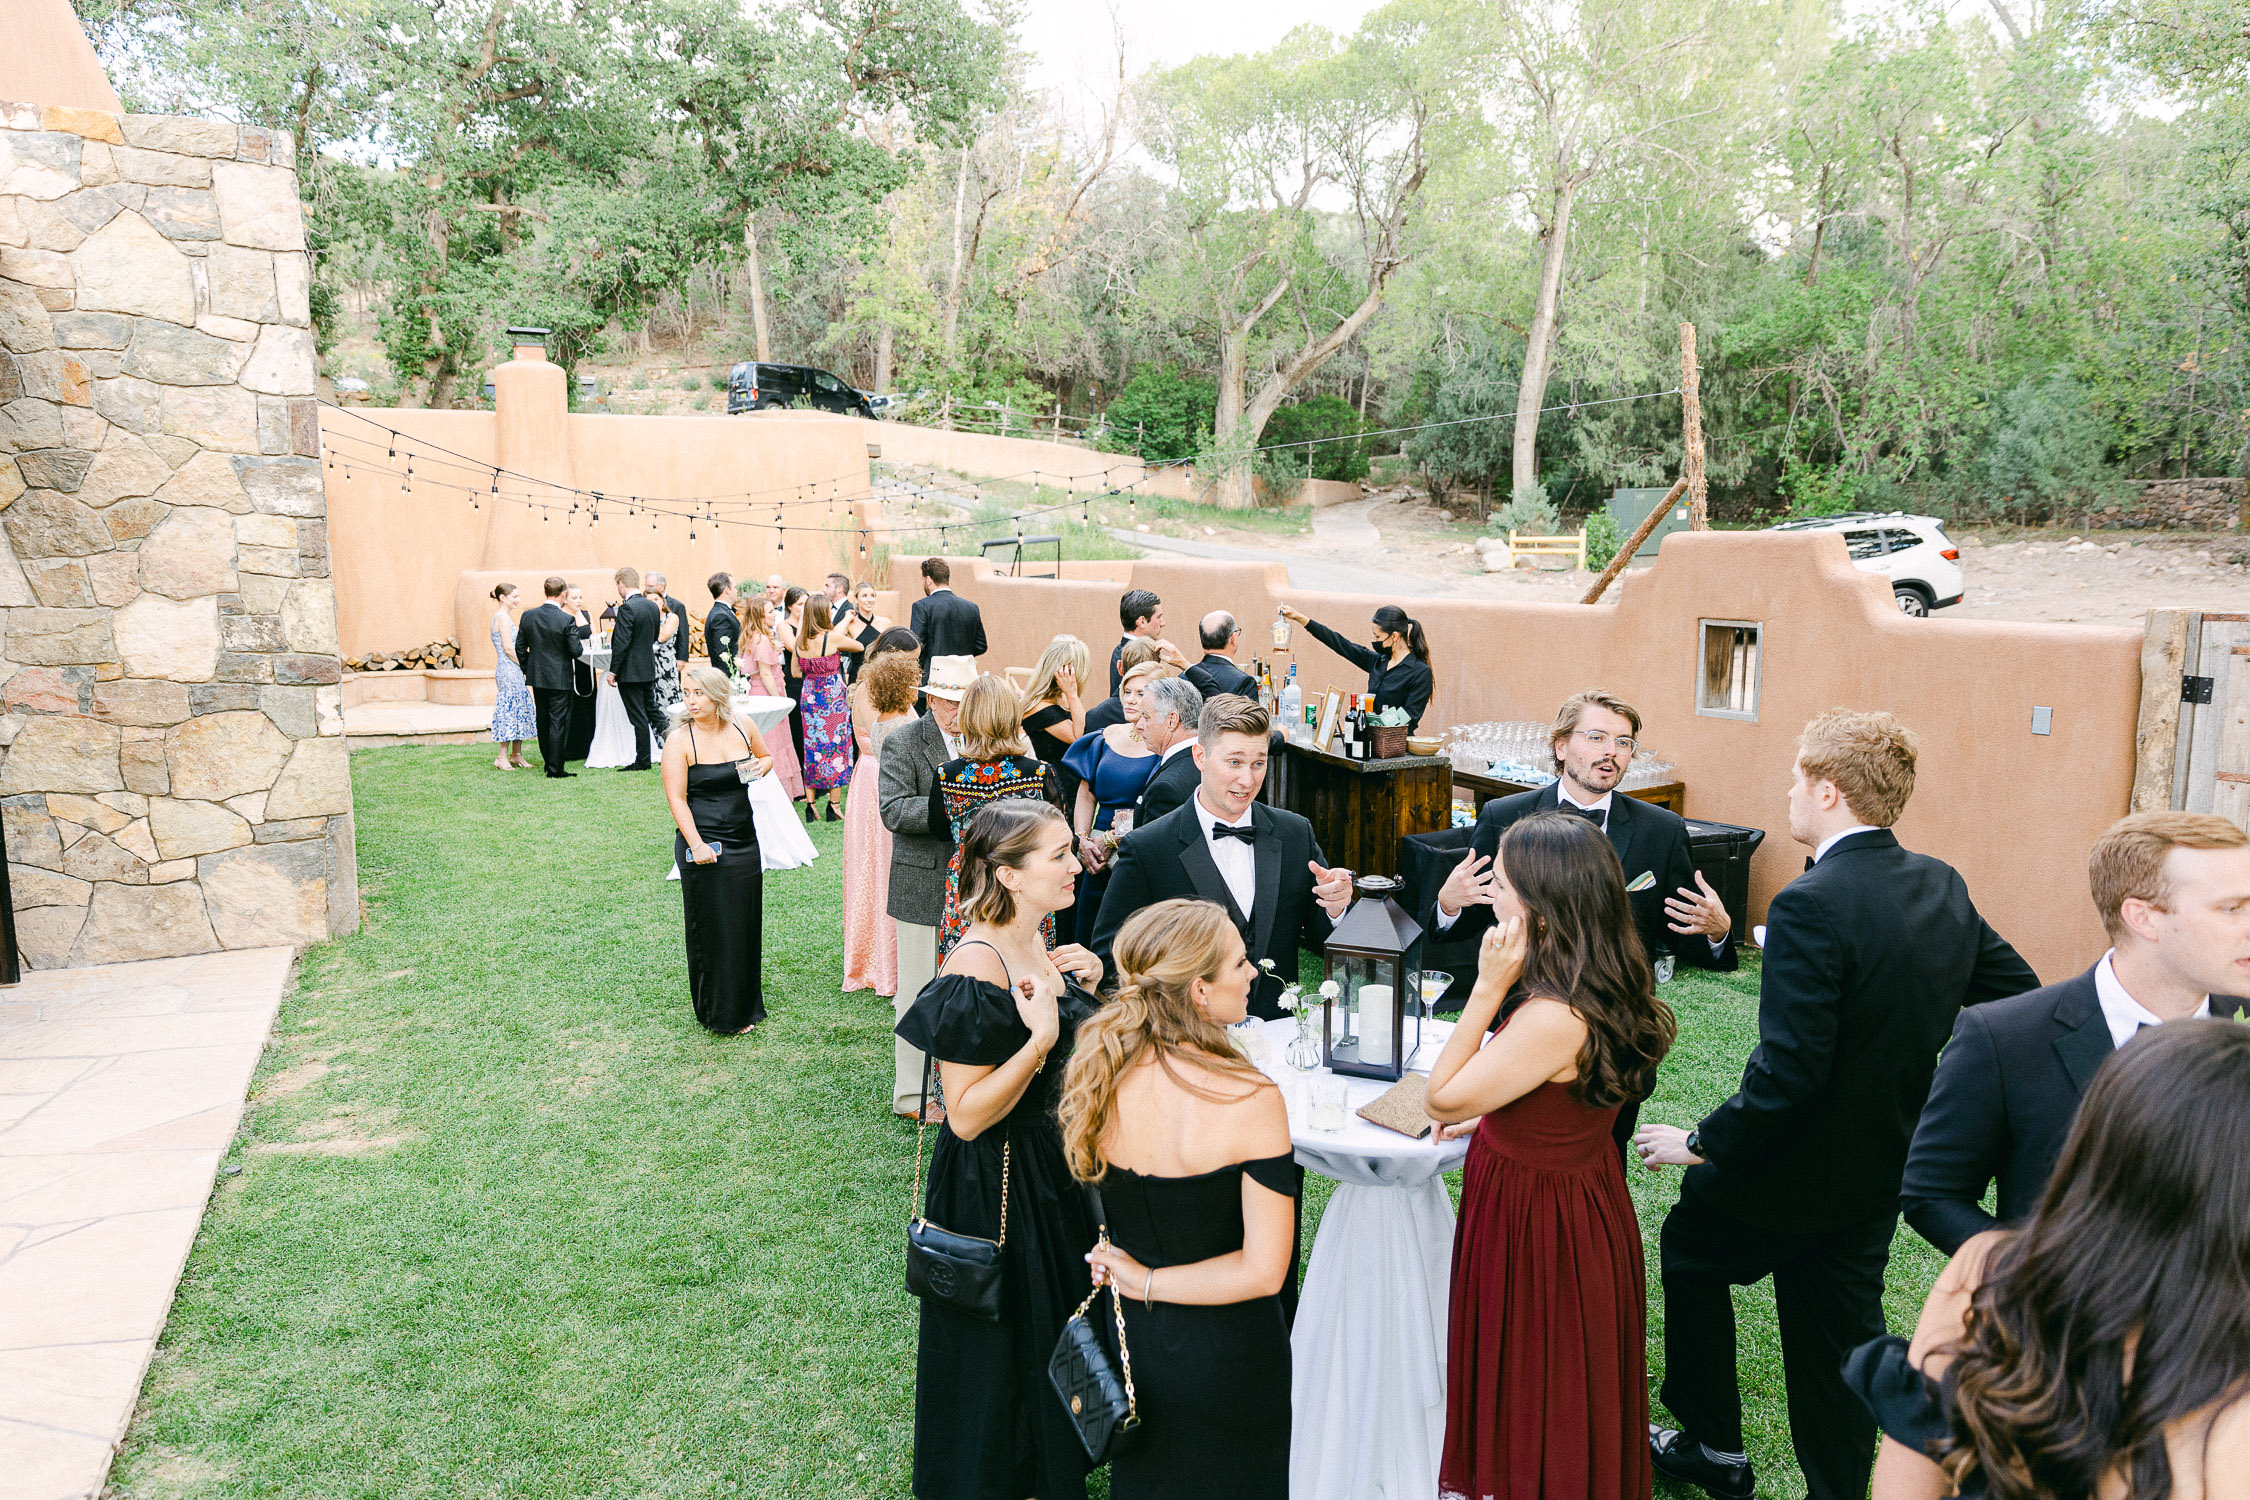 Guests mingle during cocktail hour at a wedding in Santa Fe.